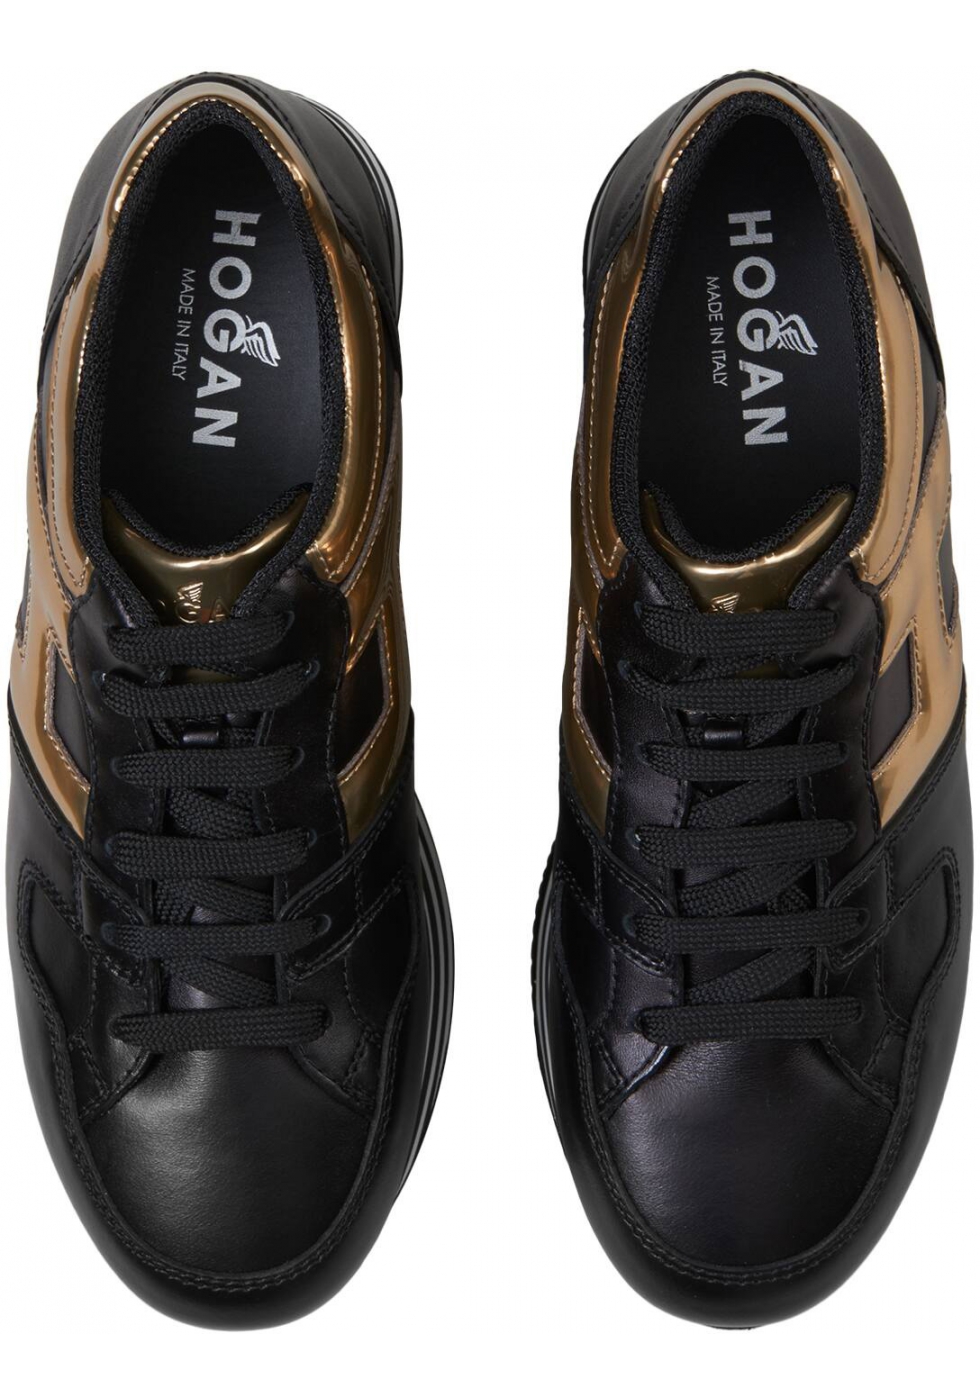 Hogan Women's wedges sneakers shoes in black leather with metallic gold ...